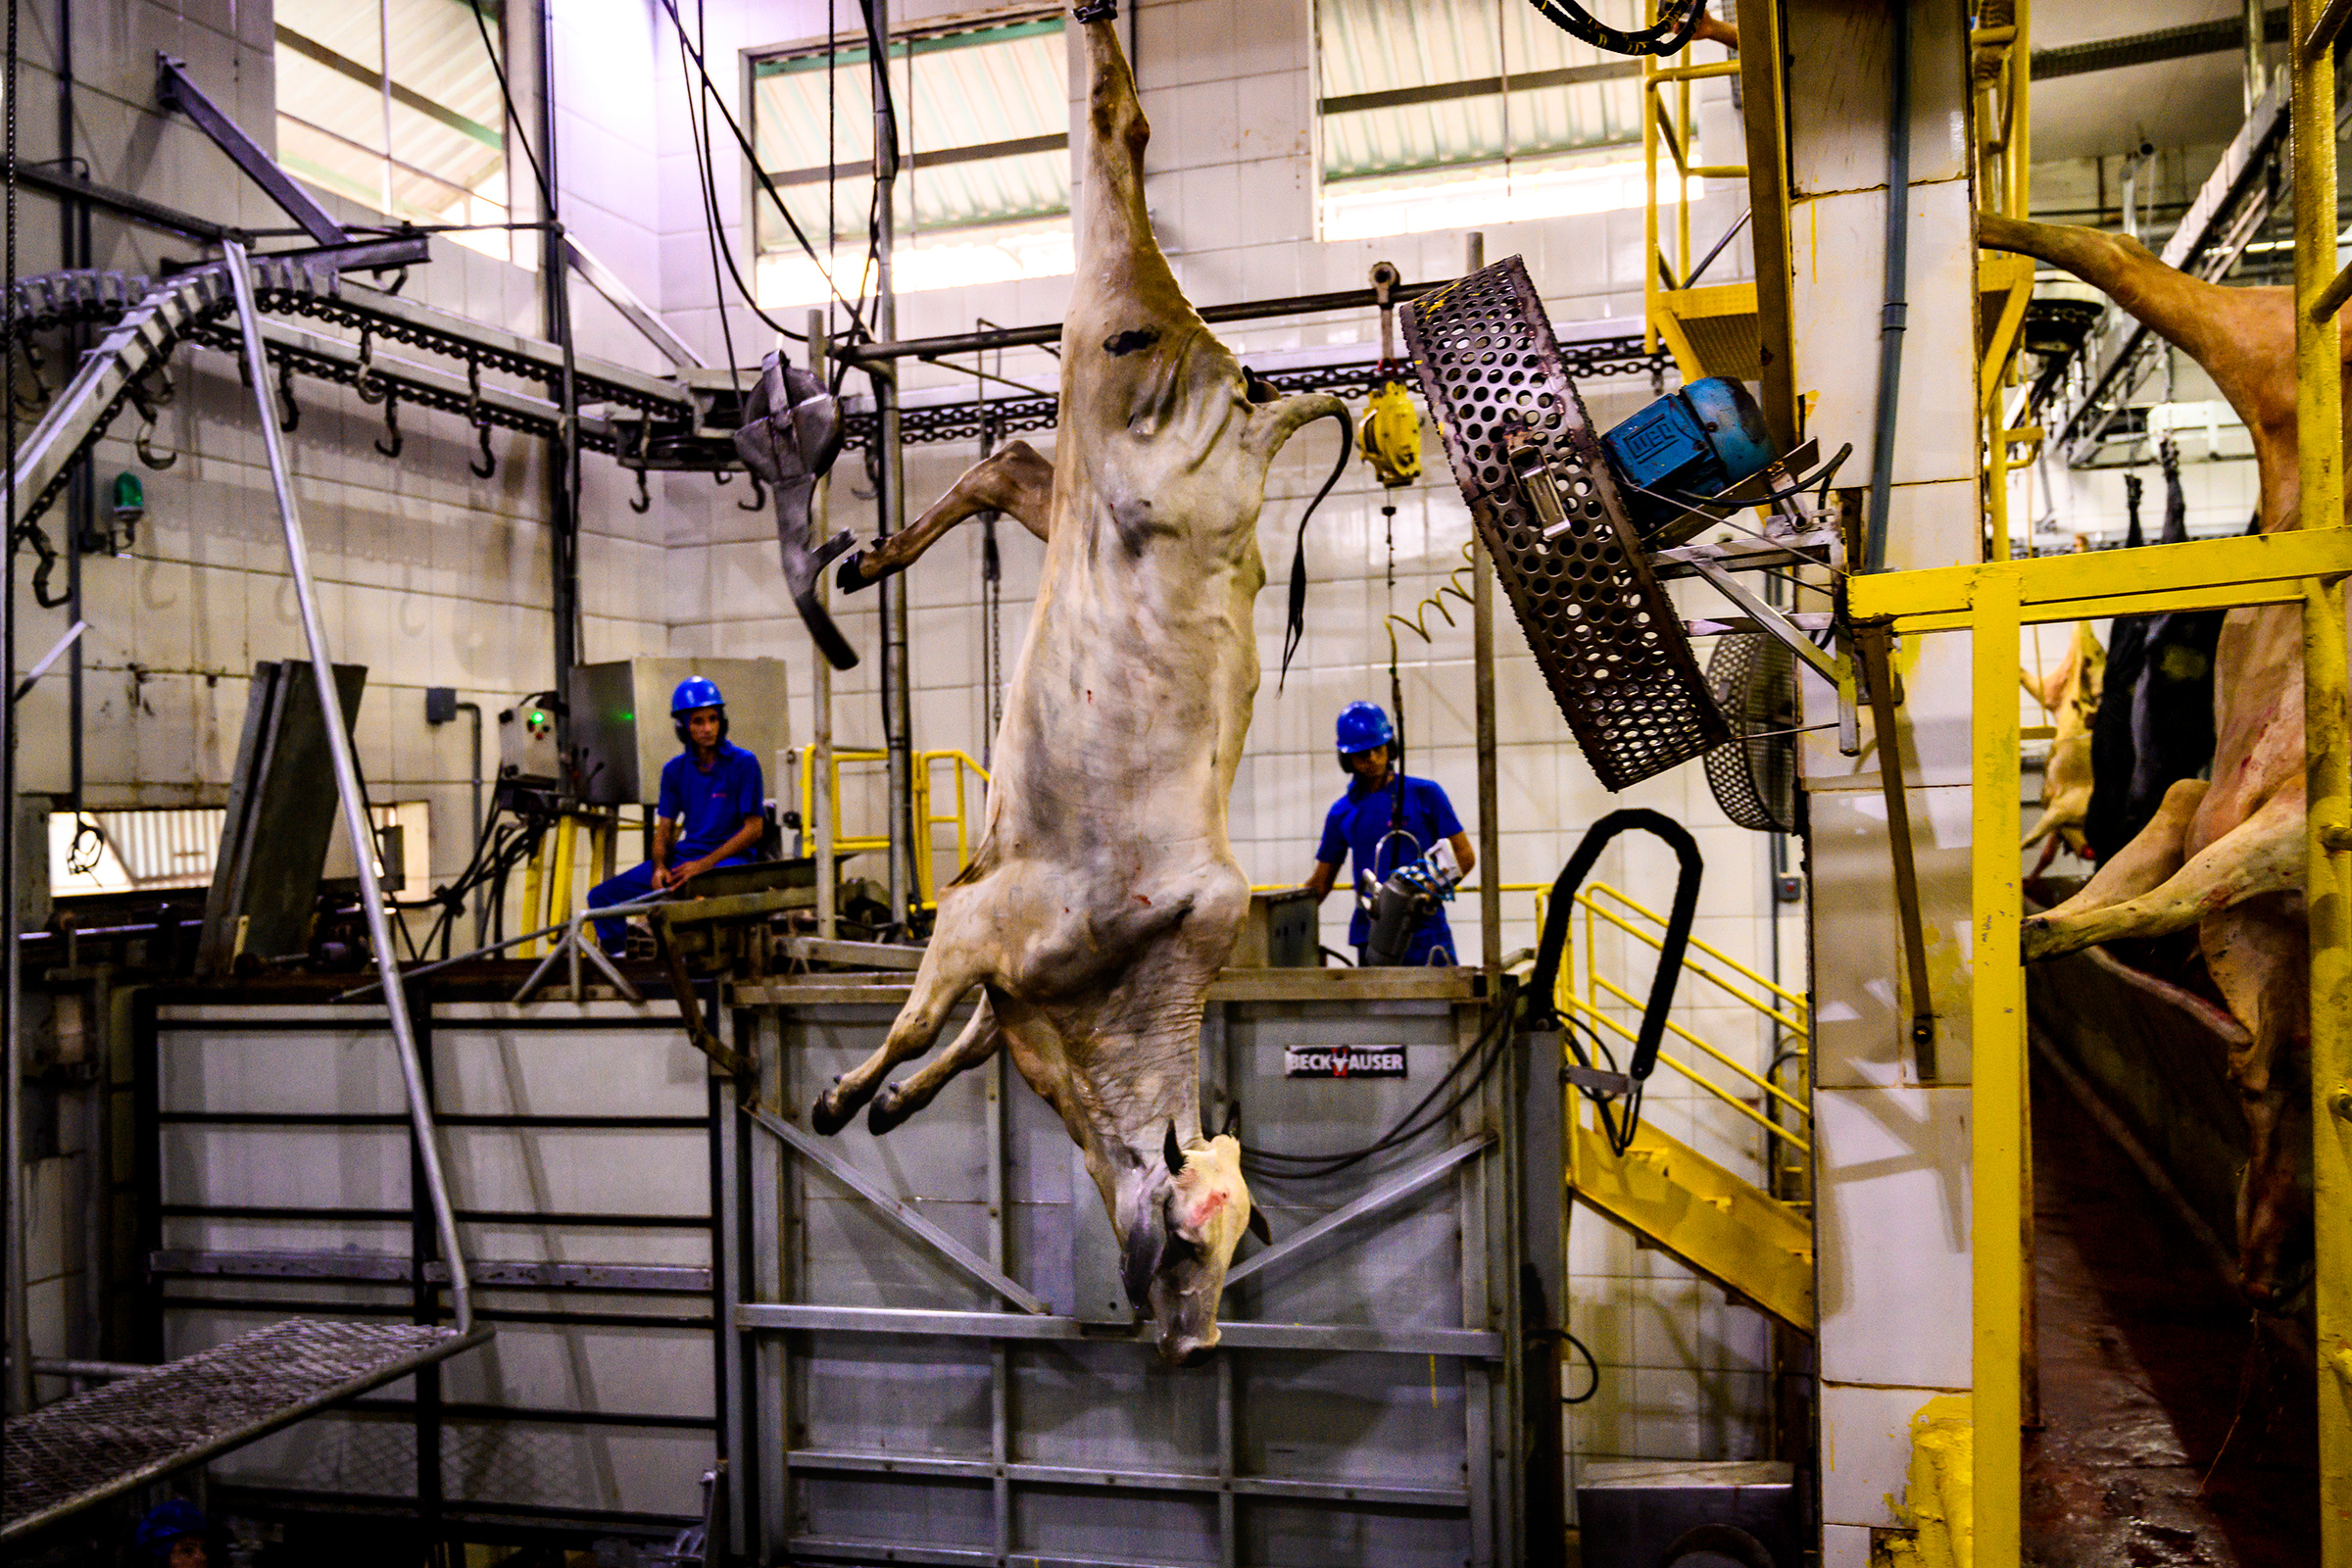 A slaughterhouse in the Brazilian state of Rondônia in February 2019. The company boasted an expansion would allow a cow to be killed every eight seconds at the facility. (Sebastián Liste—NOOR for TIME.)